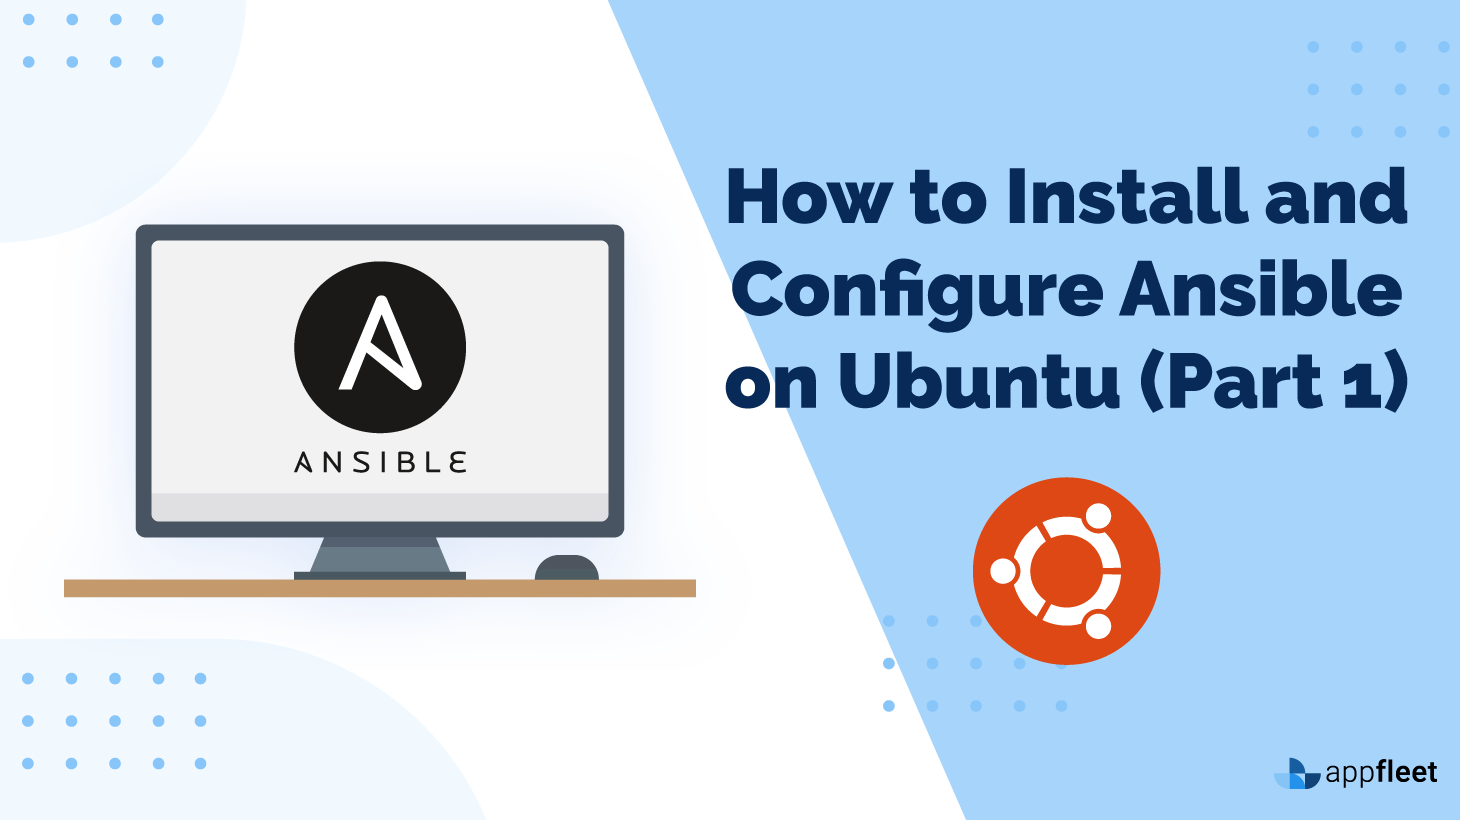 How to Install and Configure Ansible on Ubuntu (Part 1)